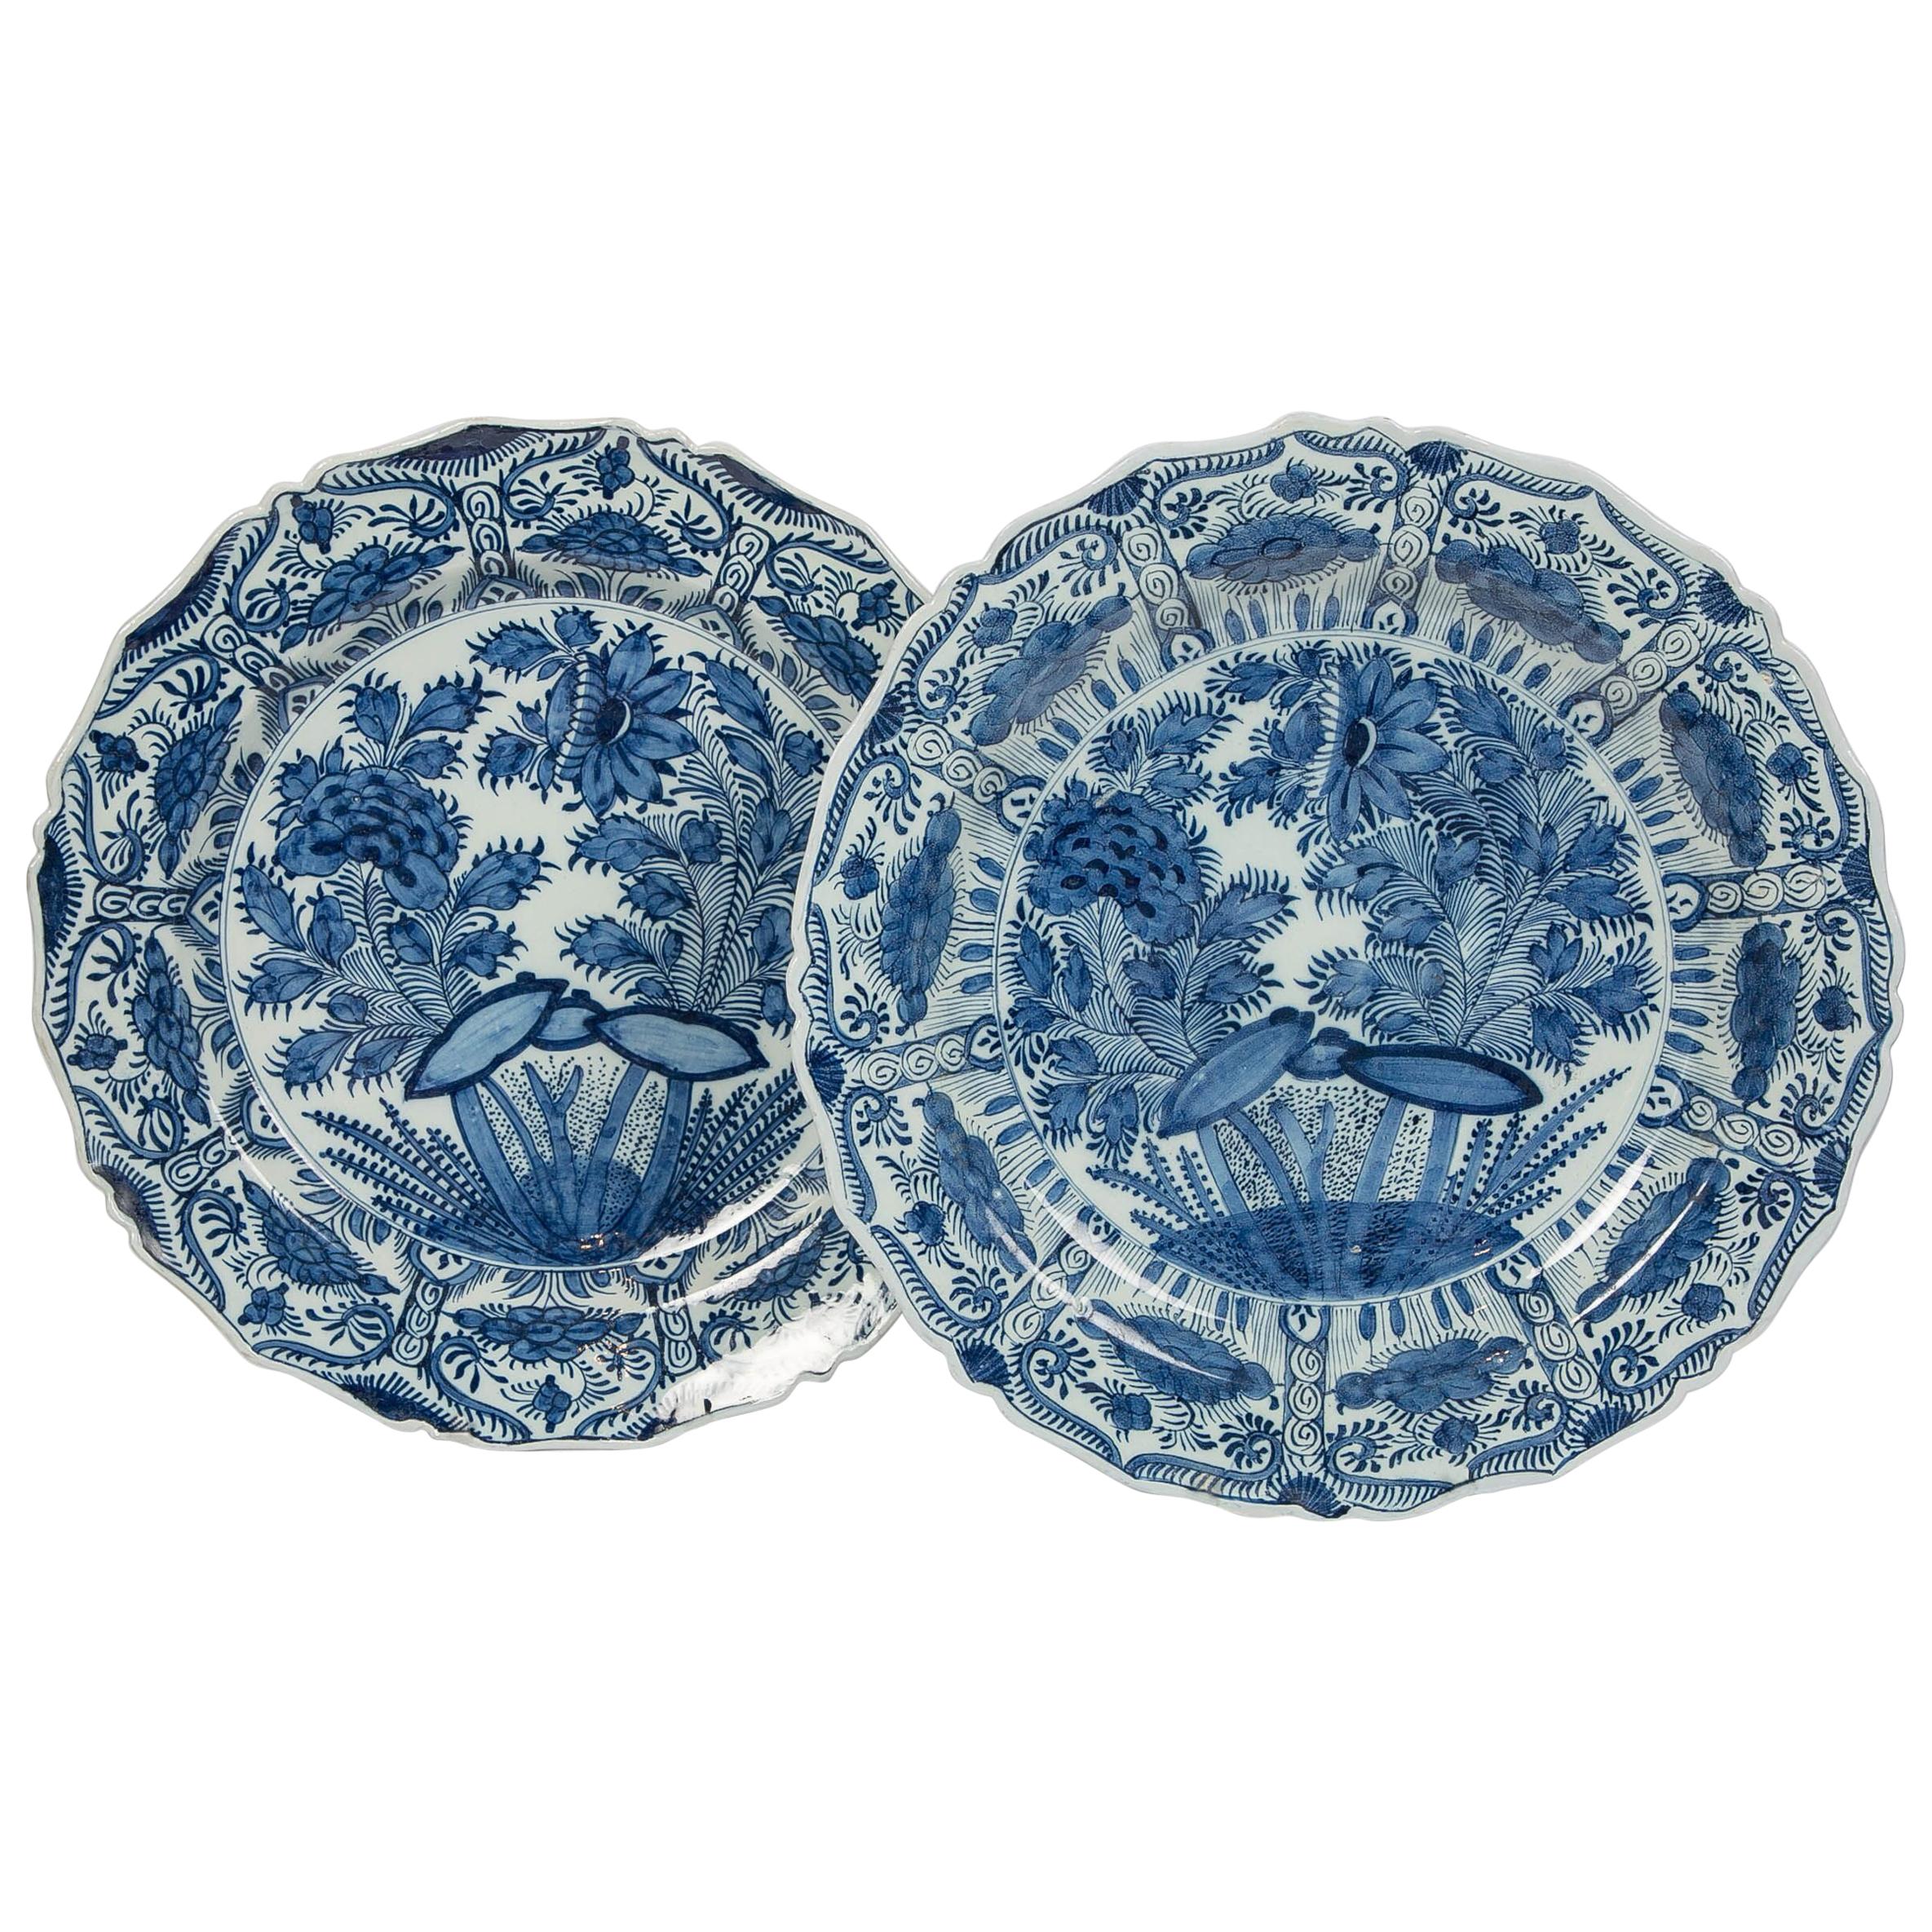 Pair of Delft Blue and White Chargers circa 1770 by De Porceleyn Bijl "The Axe"